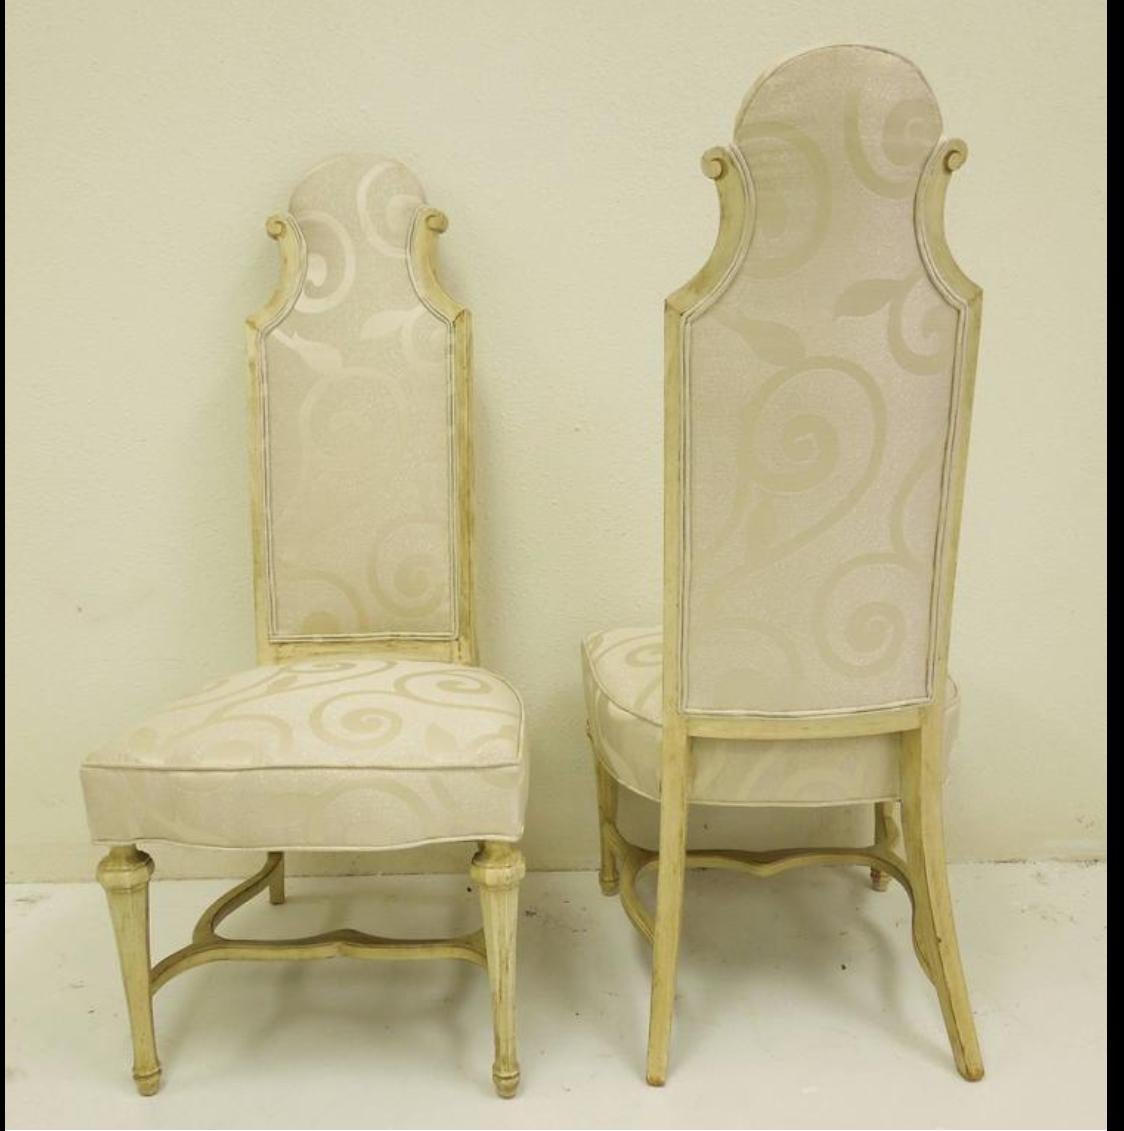 A wonderful pair of Hollywood Regency styled high back chairs. Newly upholstered in high end creme metallic swirl fabric. Obtains original antique creme wood finish. From a vintage Palm Springs estate entirely done in the Hollywood Regency look.